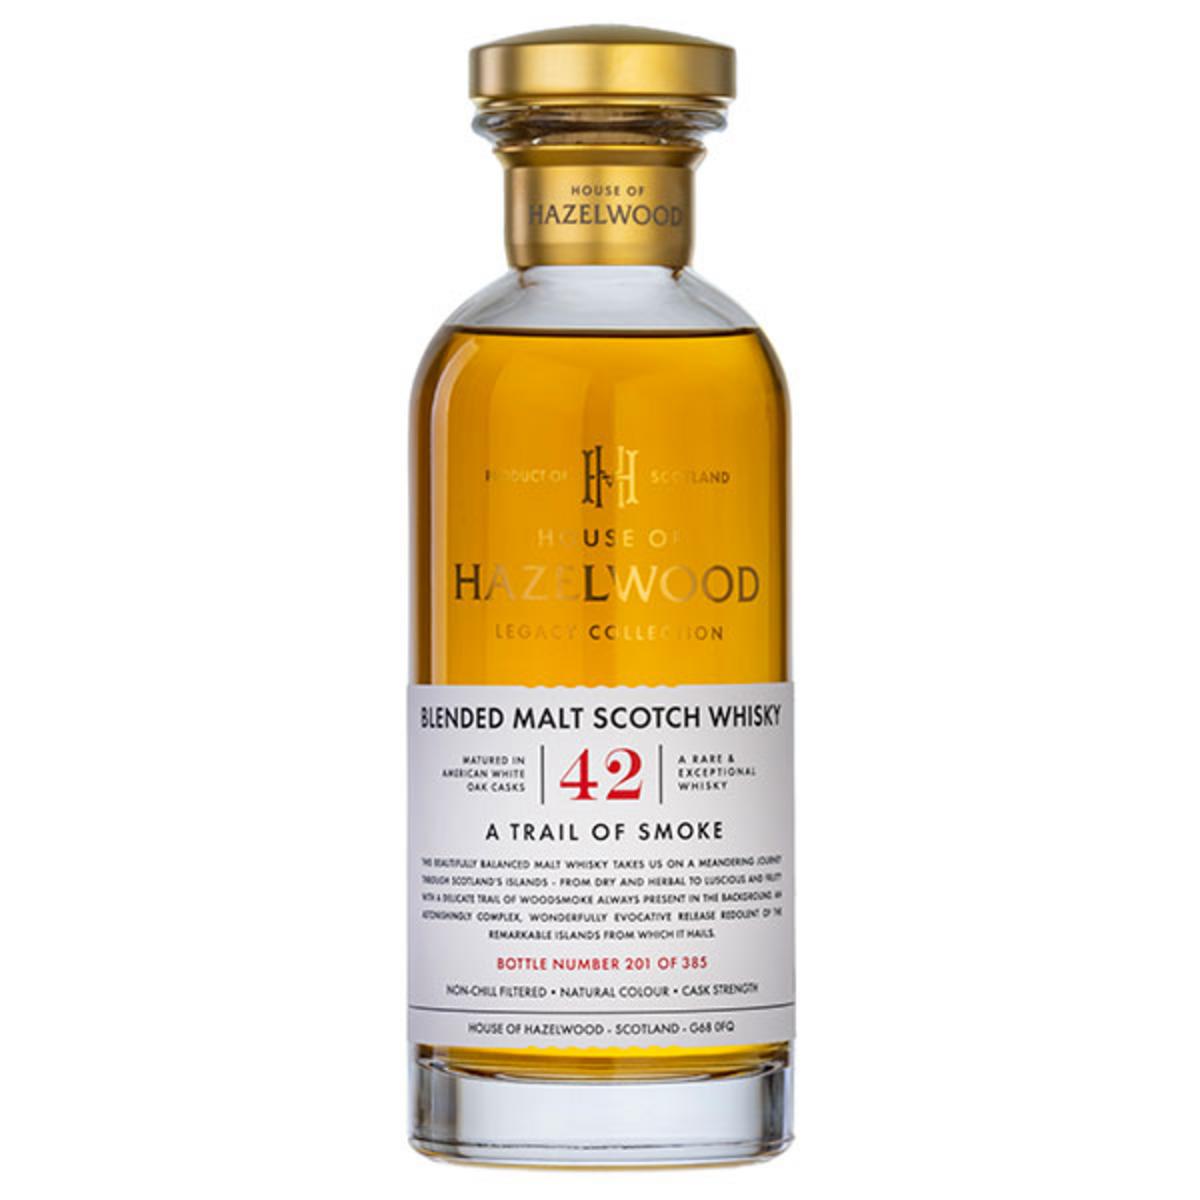 House of Hazelwood The Legacy Collection 42 year old A Trail of Smoke Review